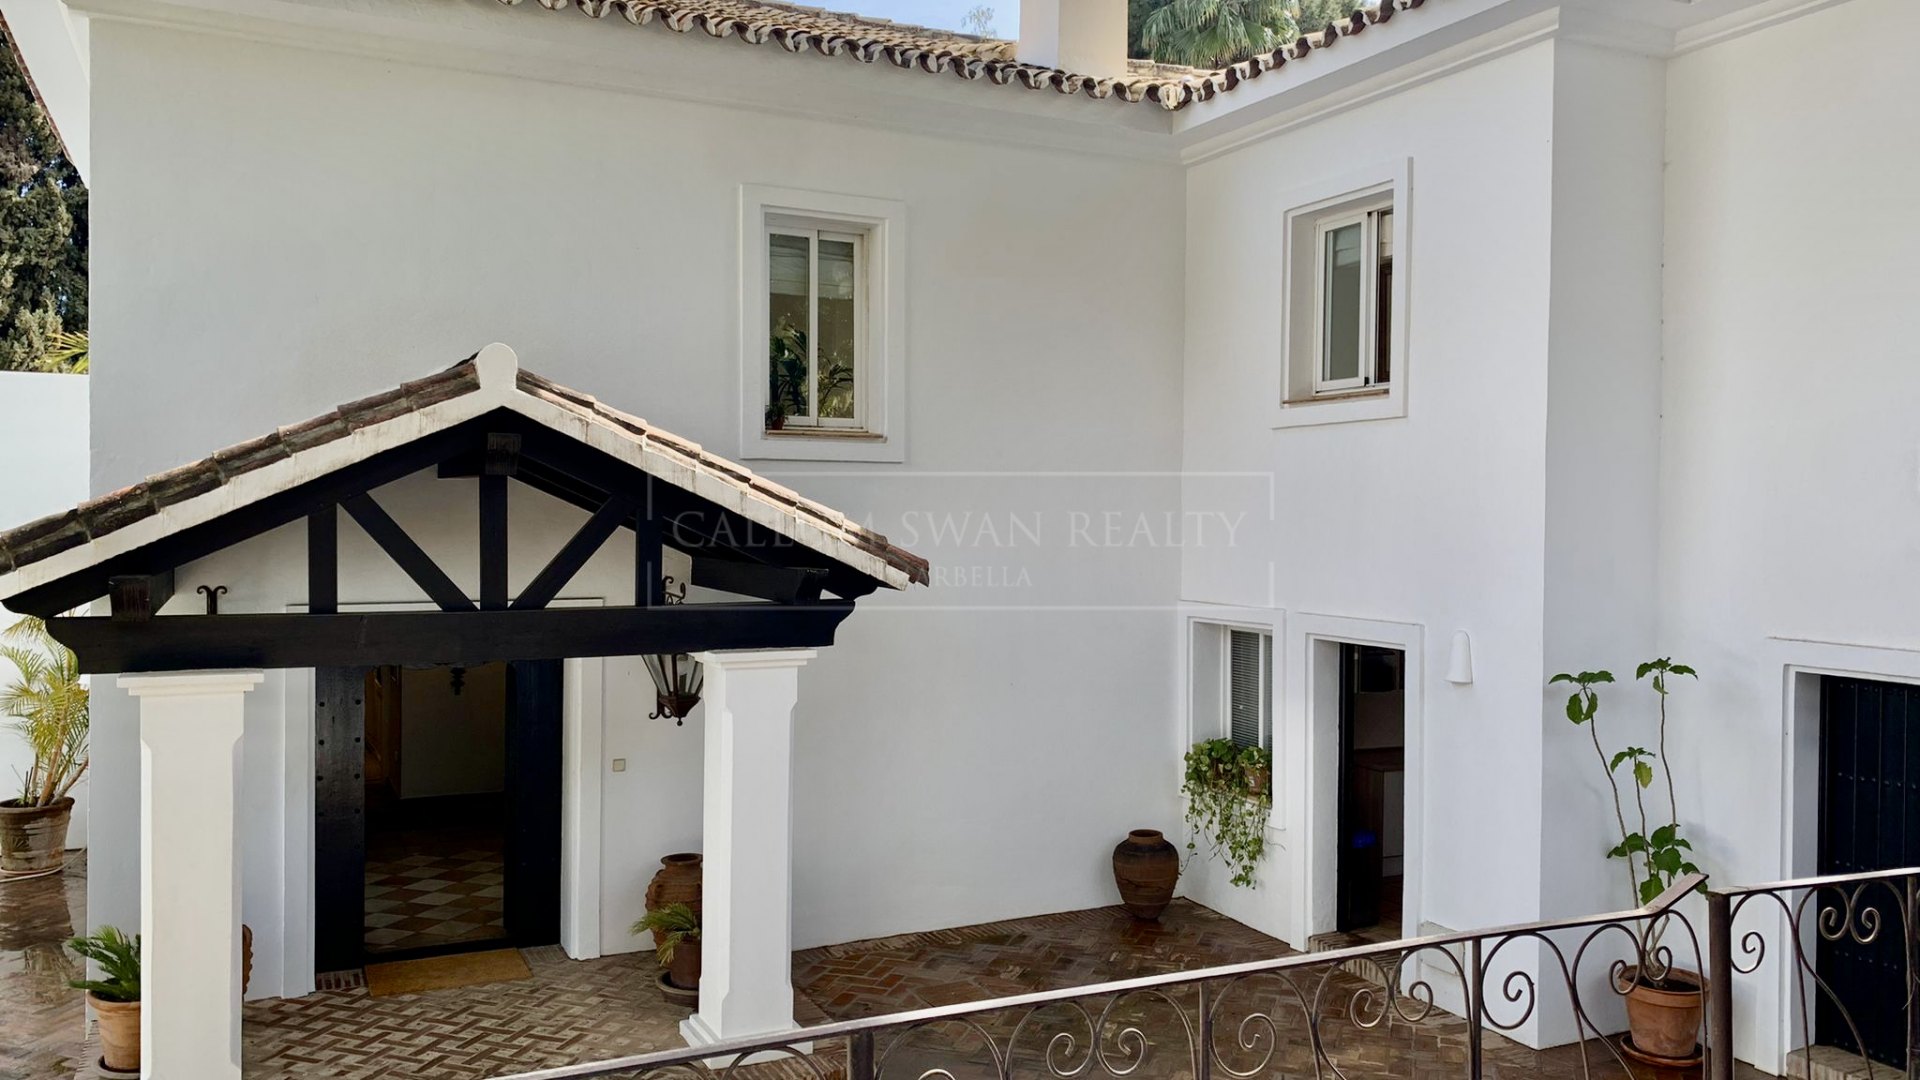 Beautiful family villa for sale on a large plot in Nagueles